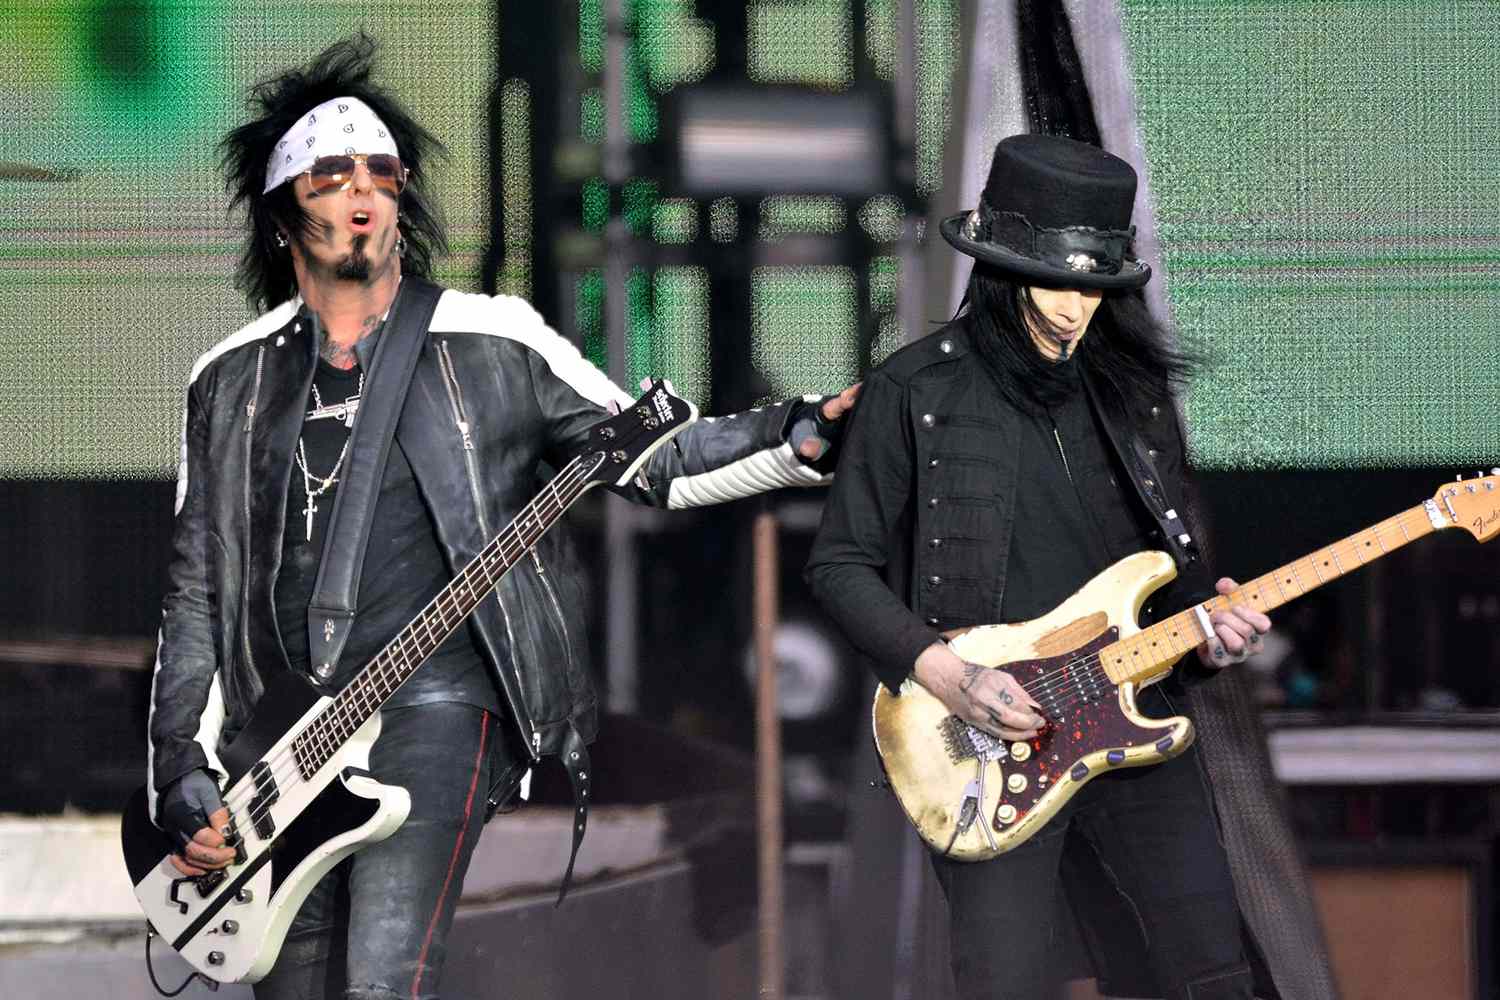 Nikki Sixx and Mick Mars performing live with Motley Crue as part of the Download Festival on June 14, 2015